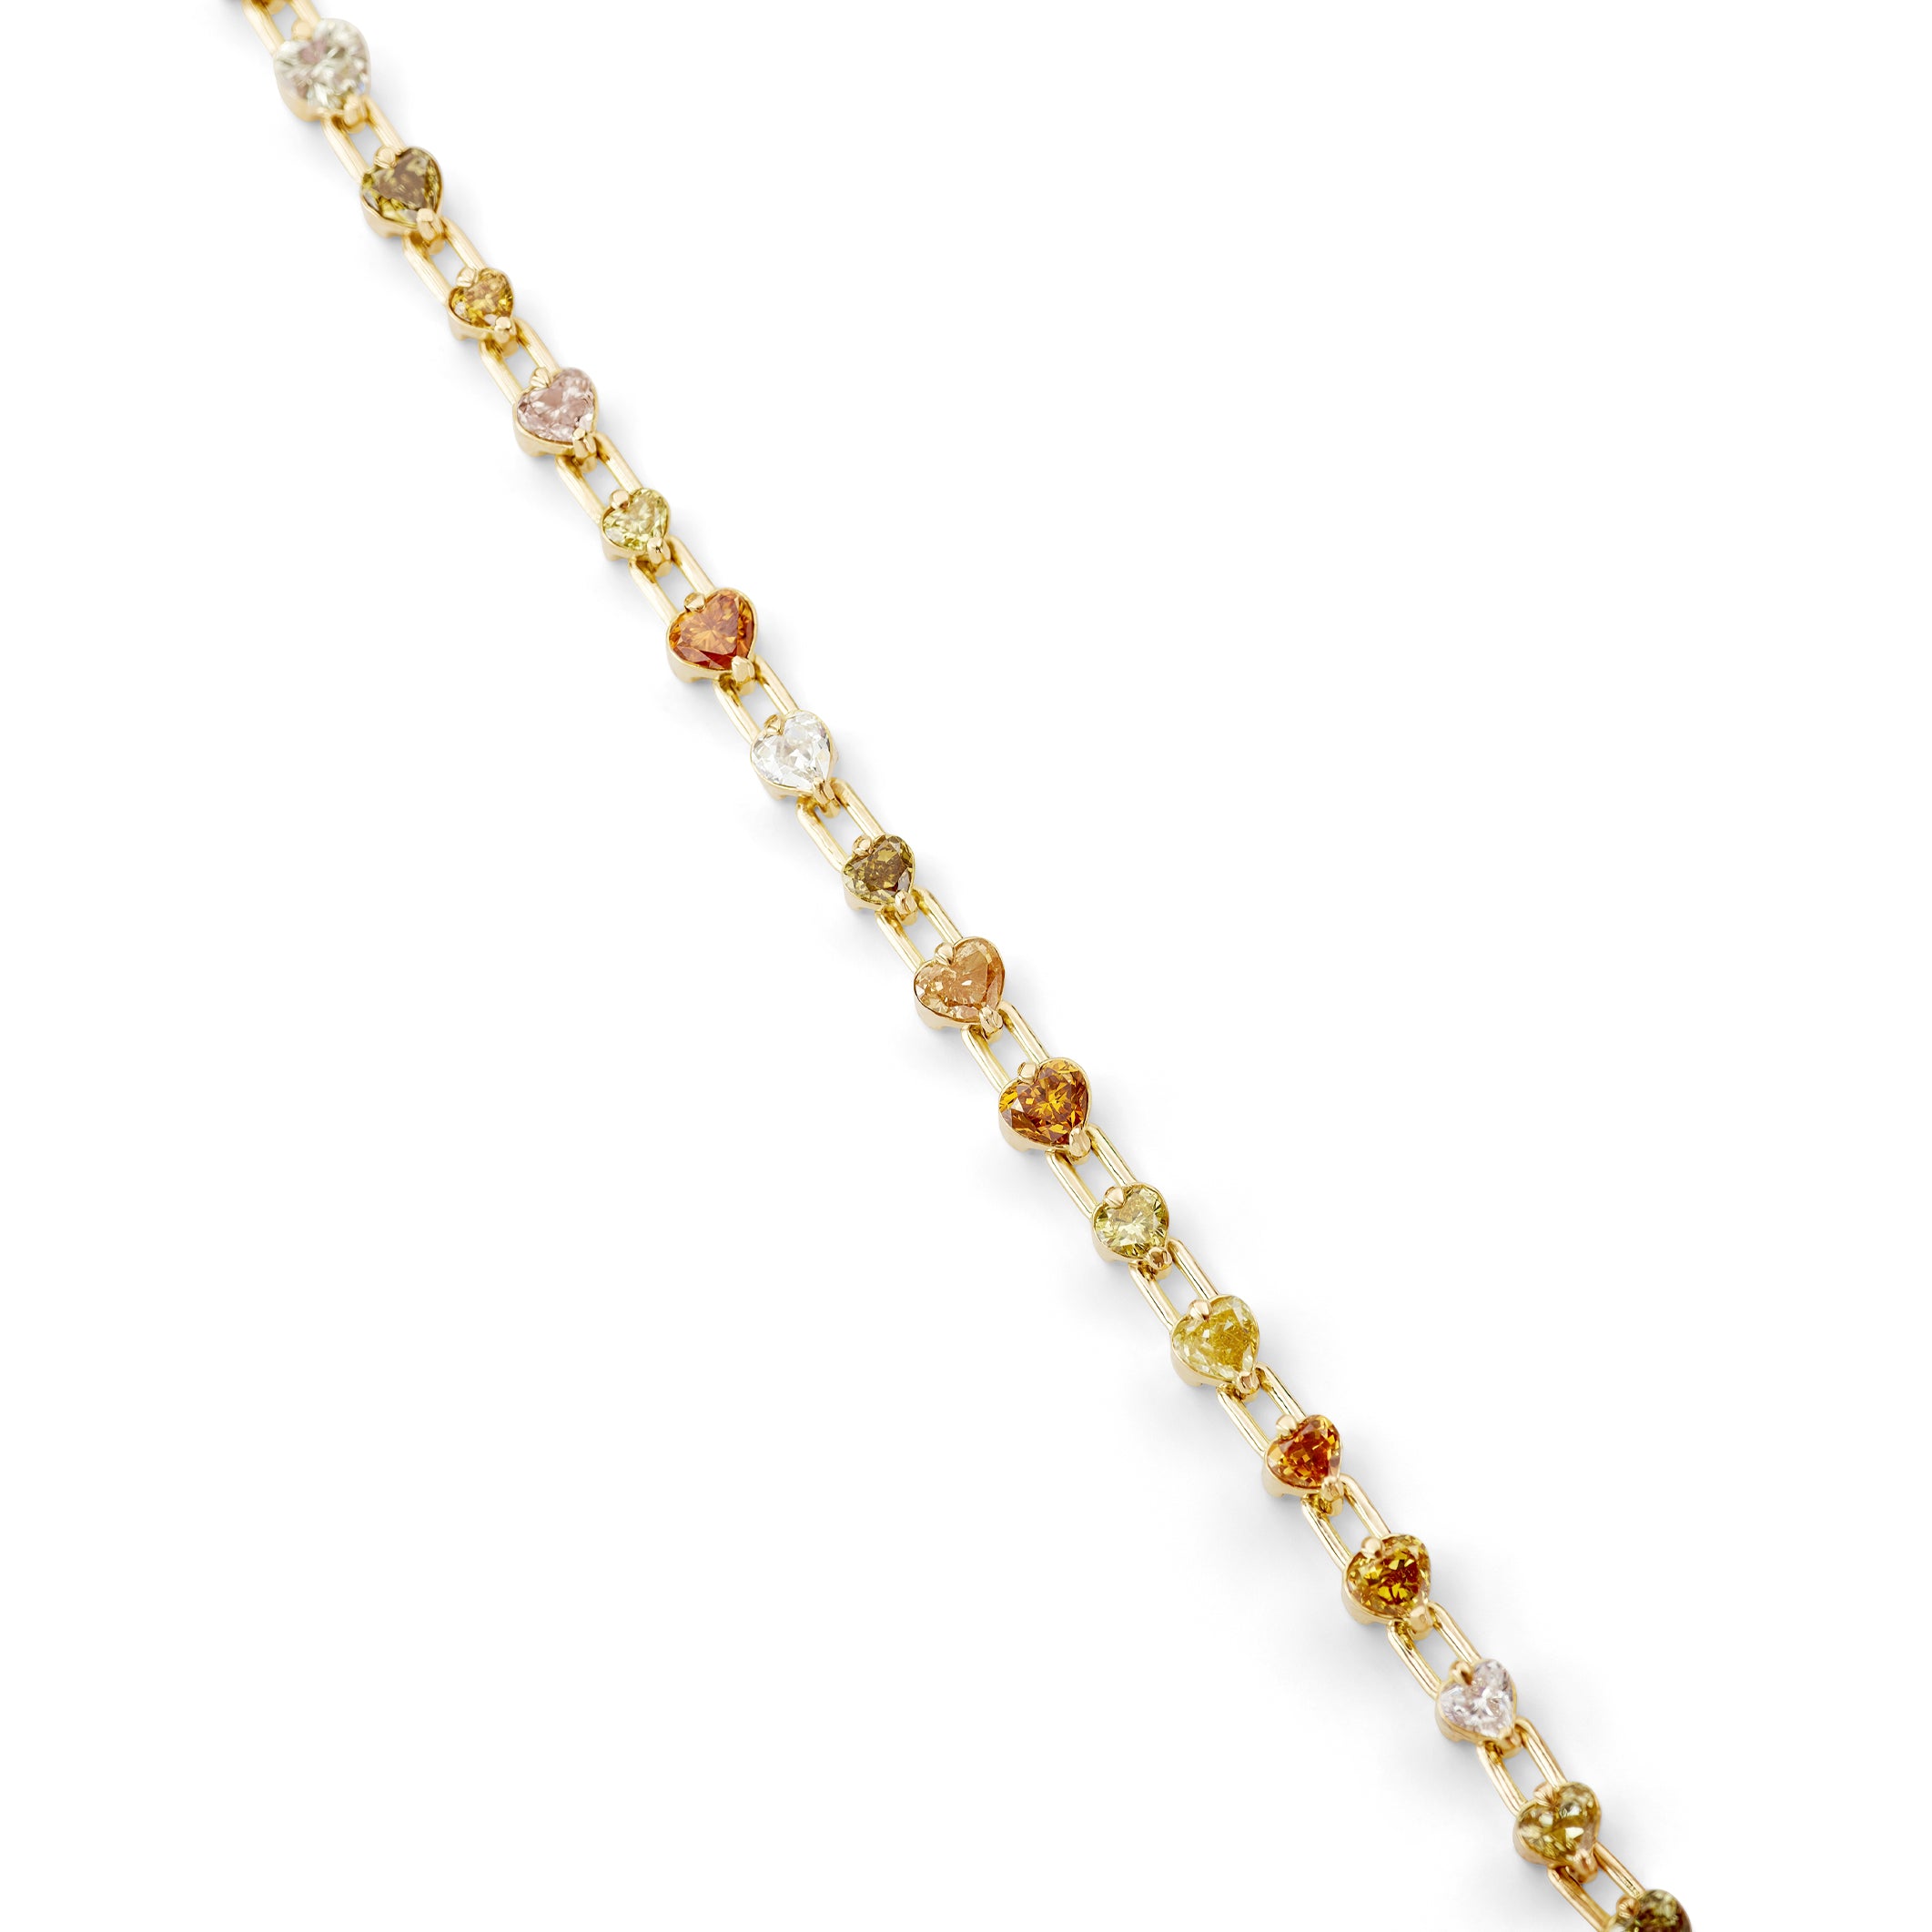 9-10mm Cultured Freshwater Pearl Circle Link Bracelet in Yellow Gold Plated  Sterling Silver - CBG001720